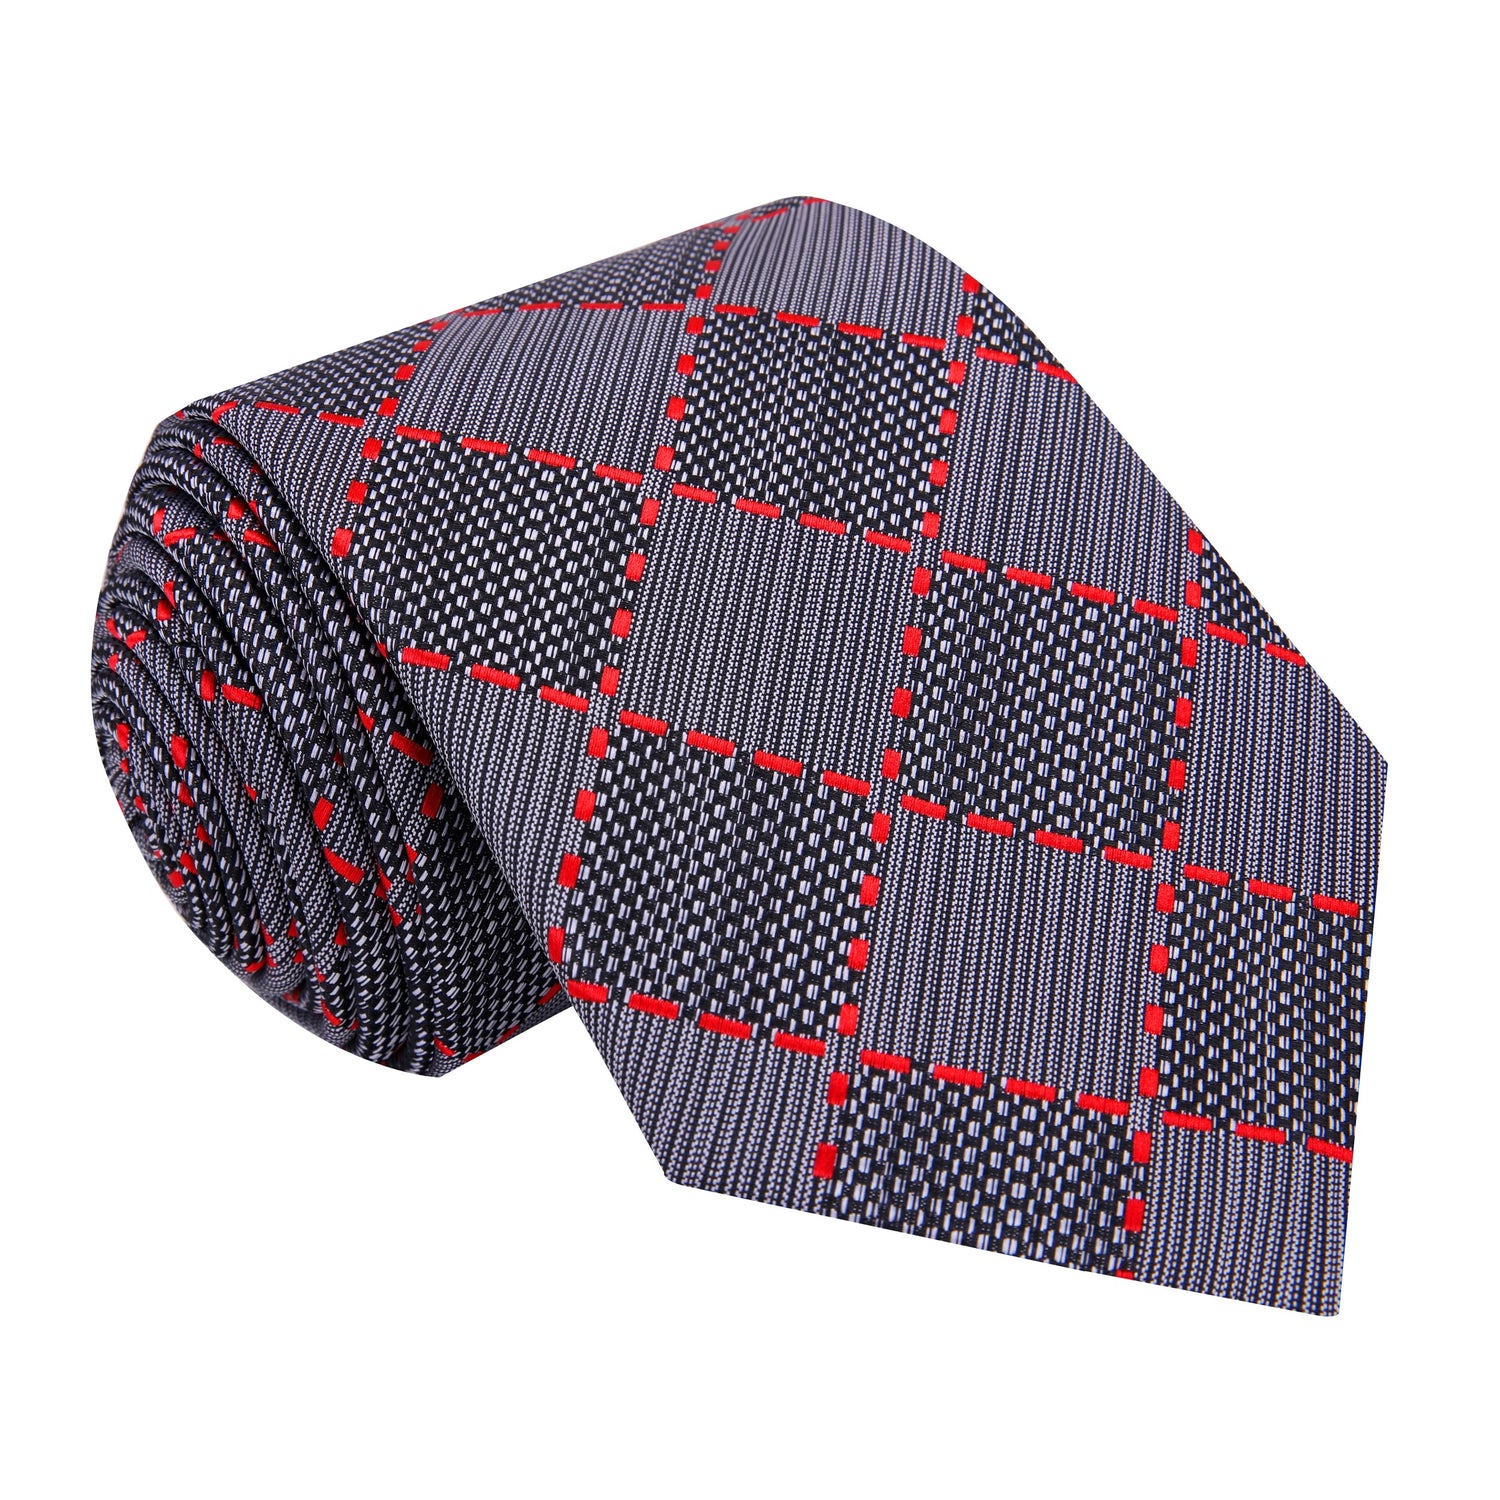 Grey, Red and Black Plaid/Abstract Tie 